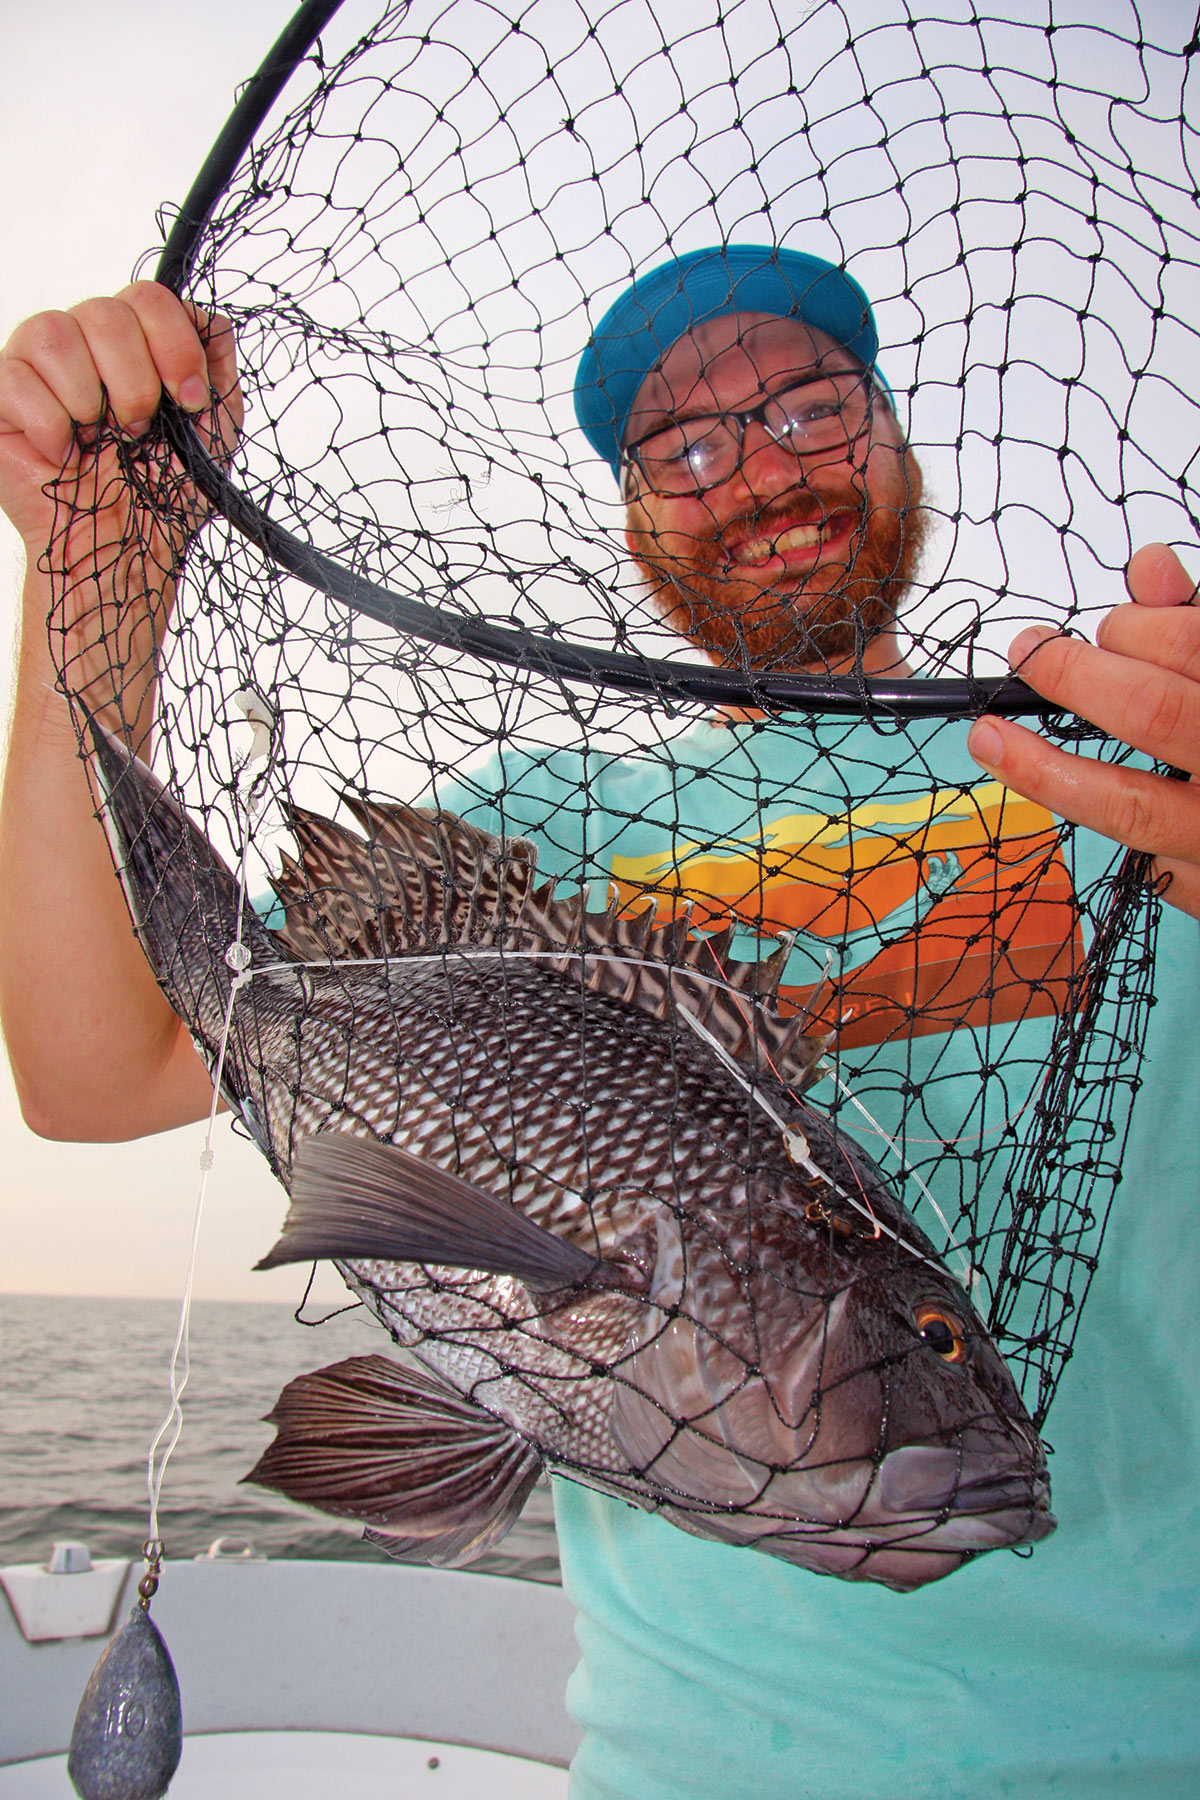 How to Catch Black Sea Bass - On The Water - Bottom Fishing